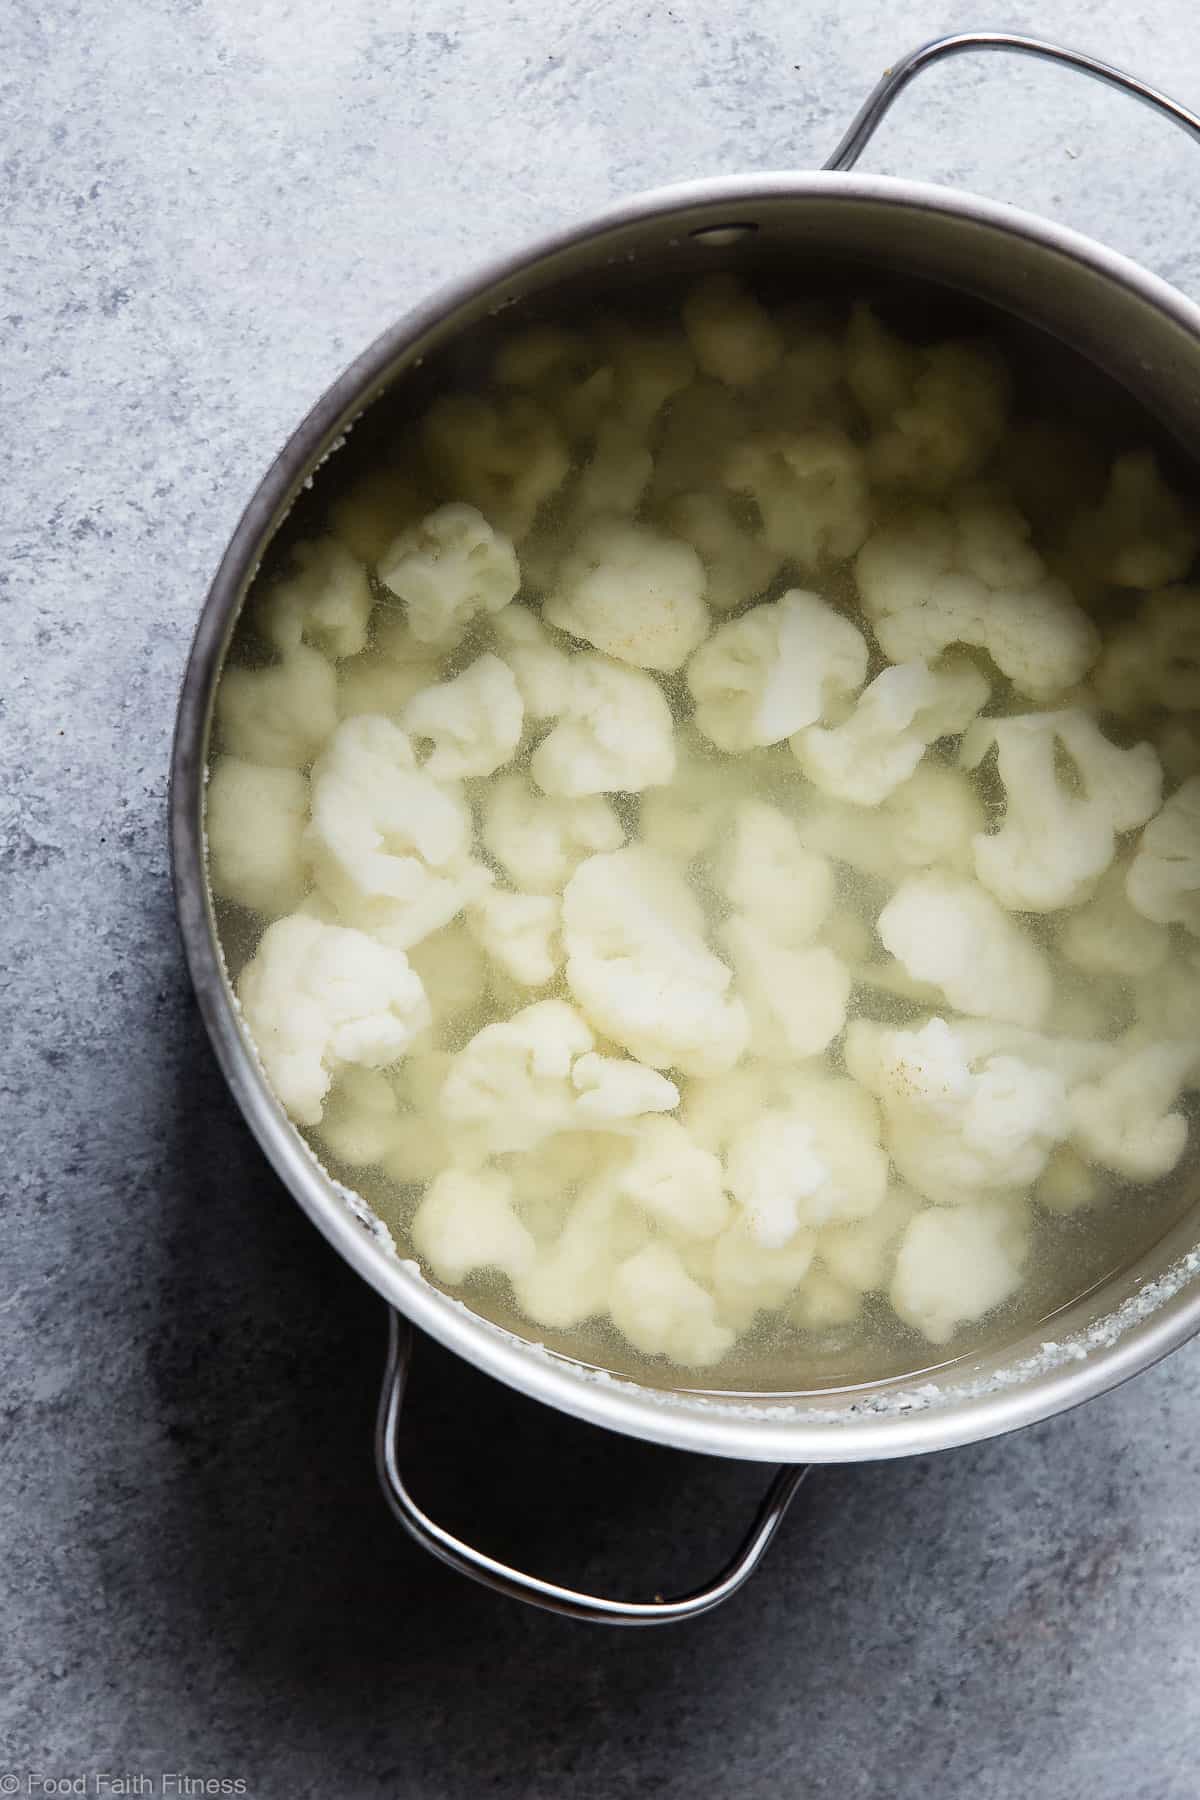 How To Make Cauliflower Mashed Potatoes - An easy, step-by-step guide with photos that shows you how to make mashed potatoes out of cauliflower, that tastes like mashed potatoes, but are keto, low carb, gluten free and healthy! | Foodfaithfitness.com | @FoodfaithFit